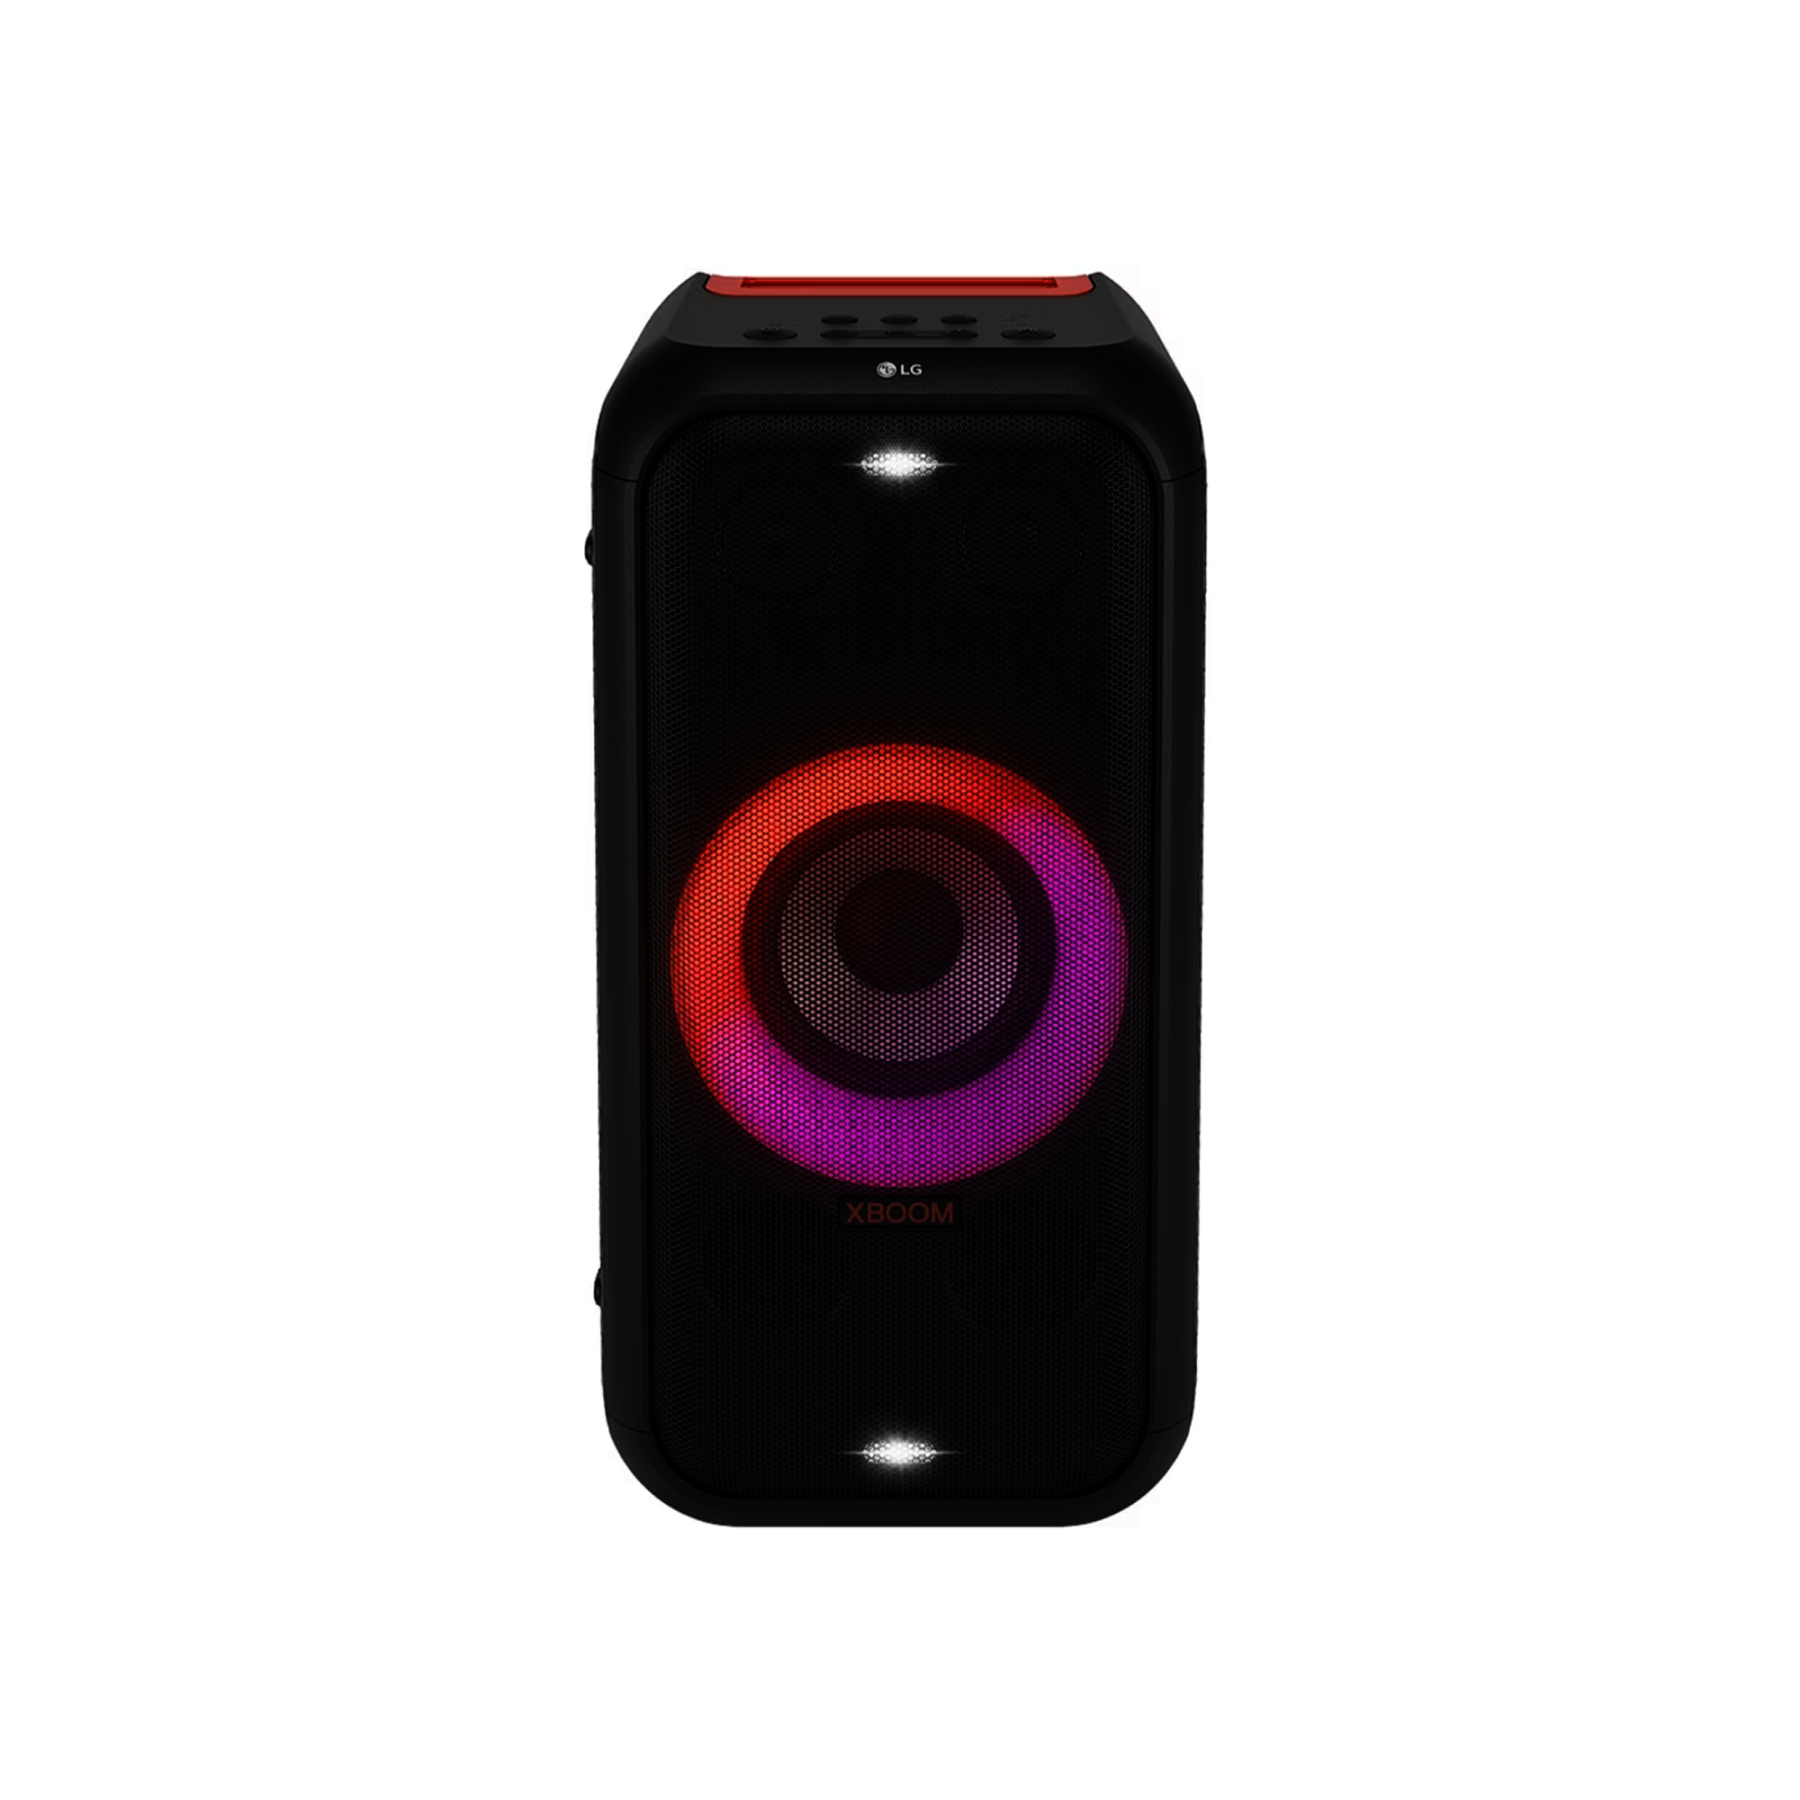 LG XBOOM XL5S Party Buy Online Appliances with Your Bluetooth Warranty Home | With Speaker